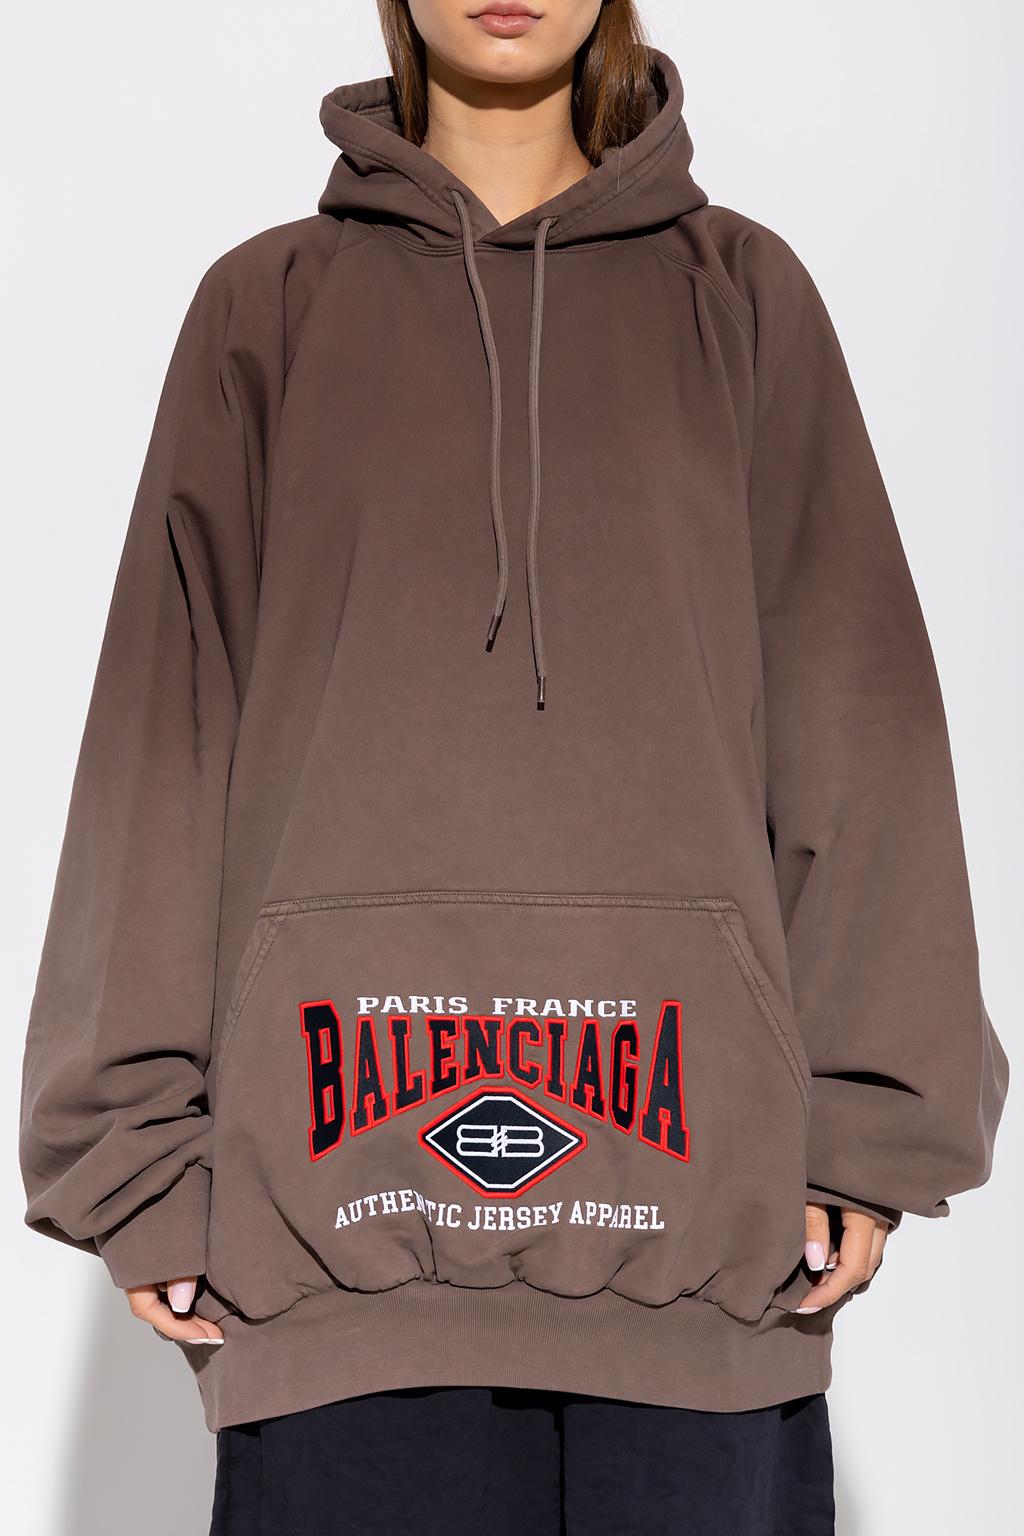 Balenciaga Oversize Hoodie in Brown | Lyst